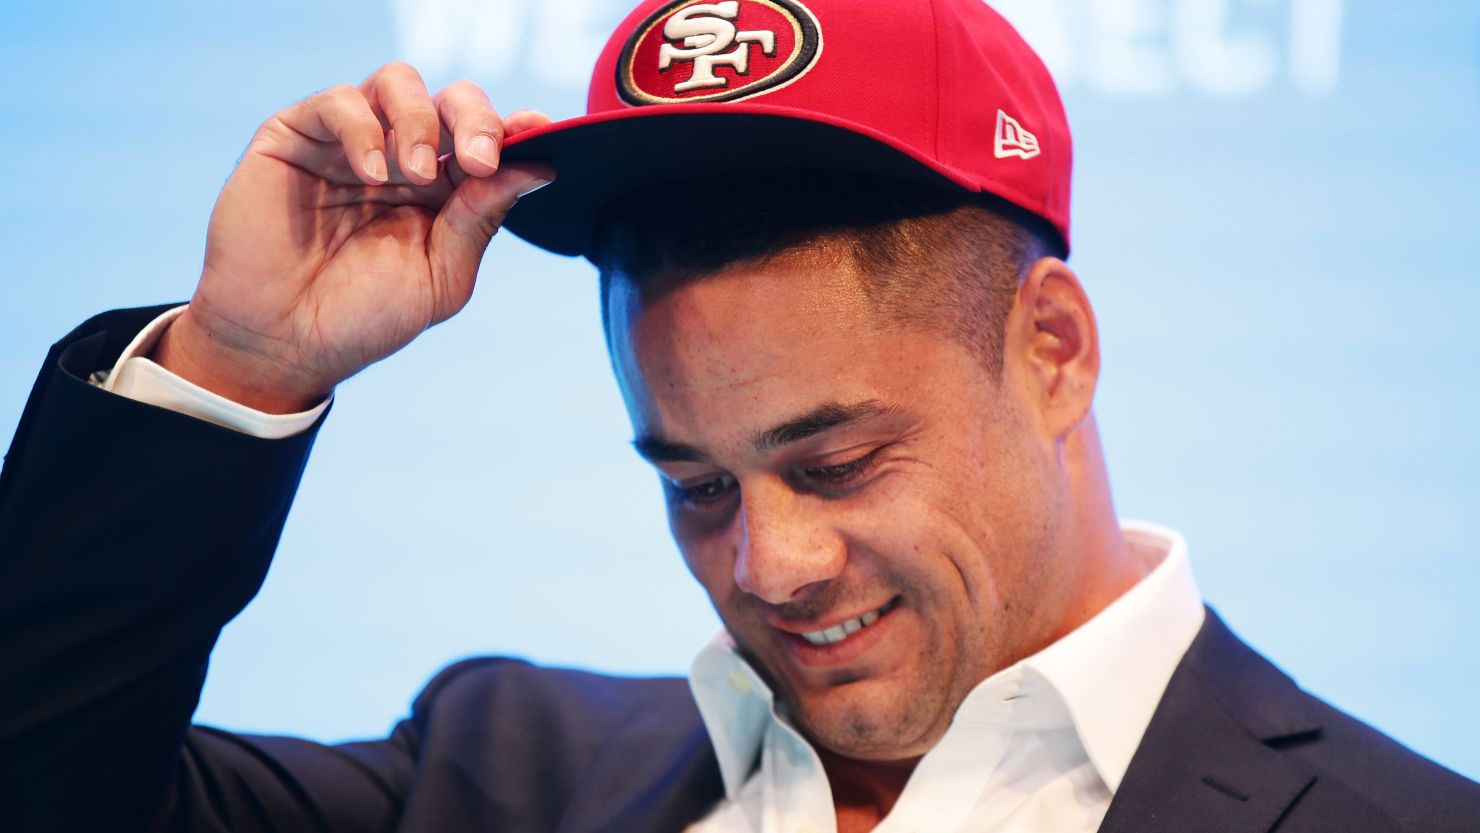 Jarryd Hayne speaks to the media during a press conference at the Telstra Amphitheatre on March 3, 2015 in Sydney, Australia. 